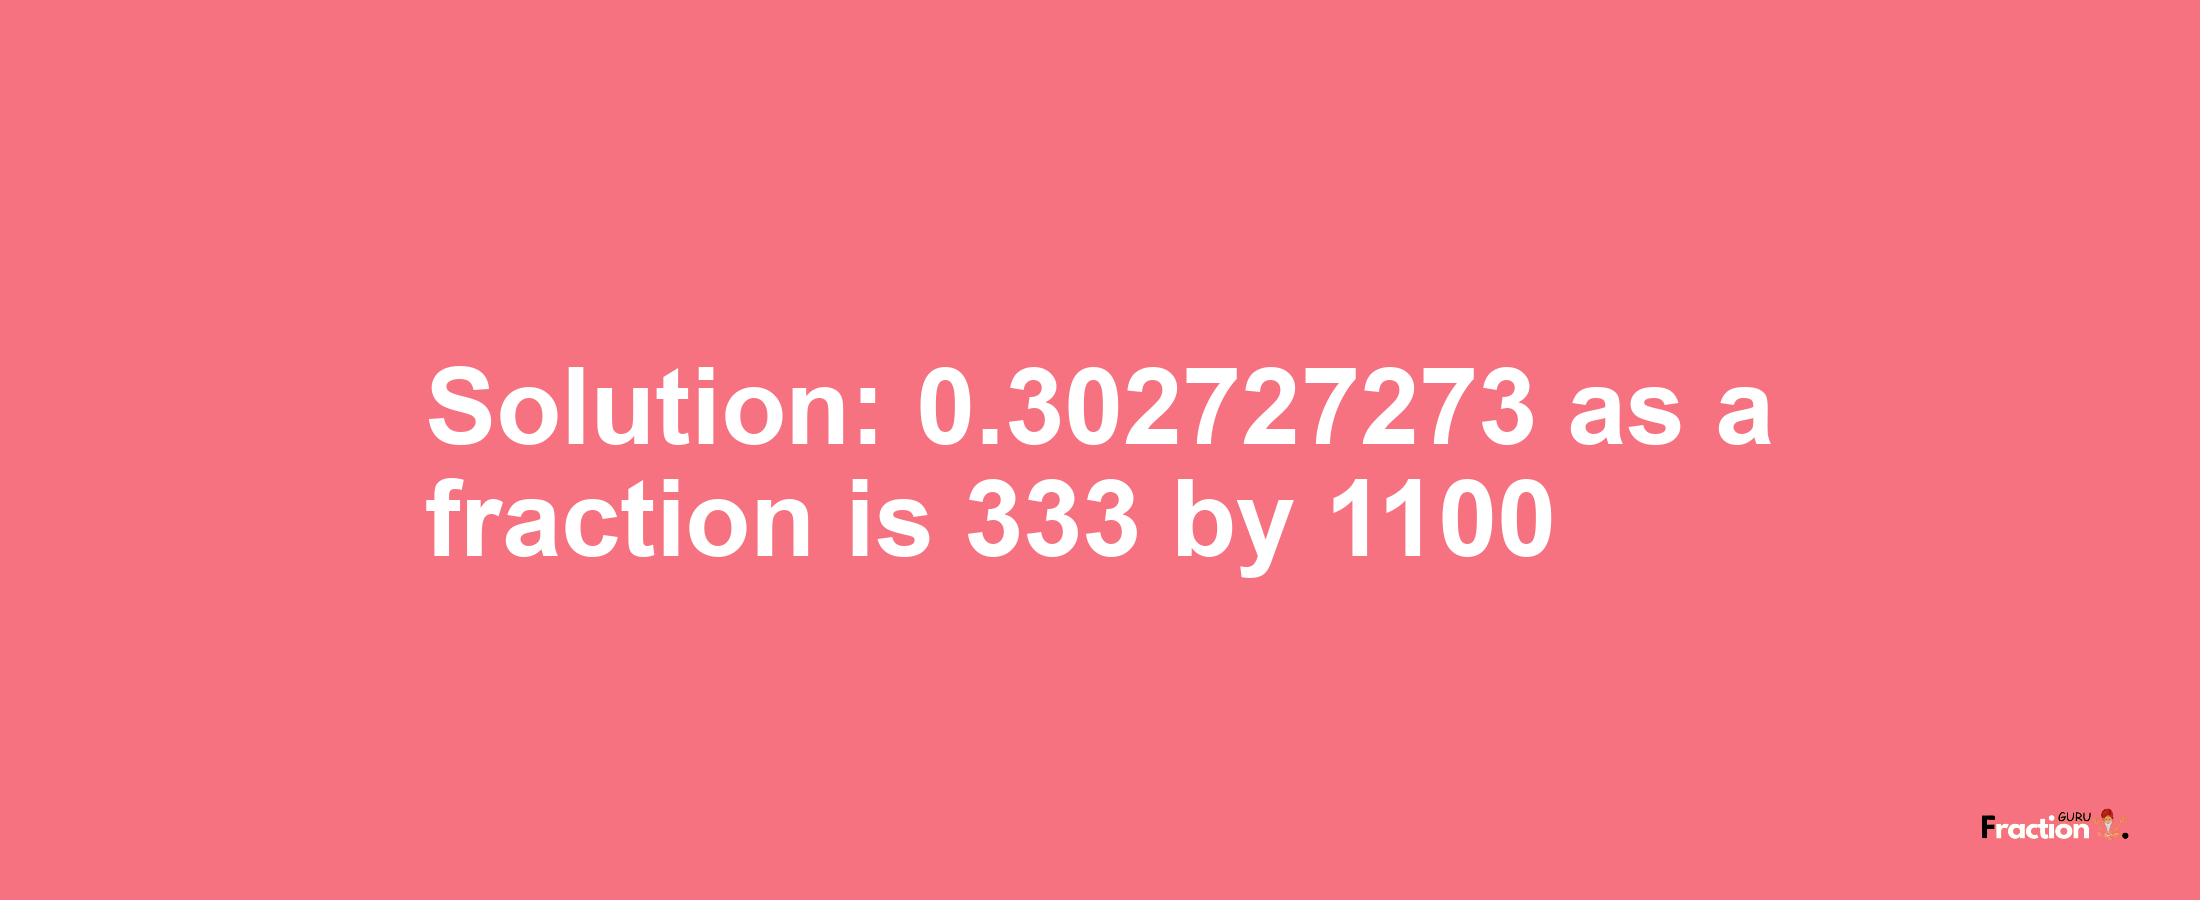 Solution:0.302727273 as a fraction is 333/1100